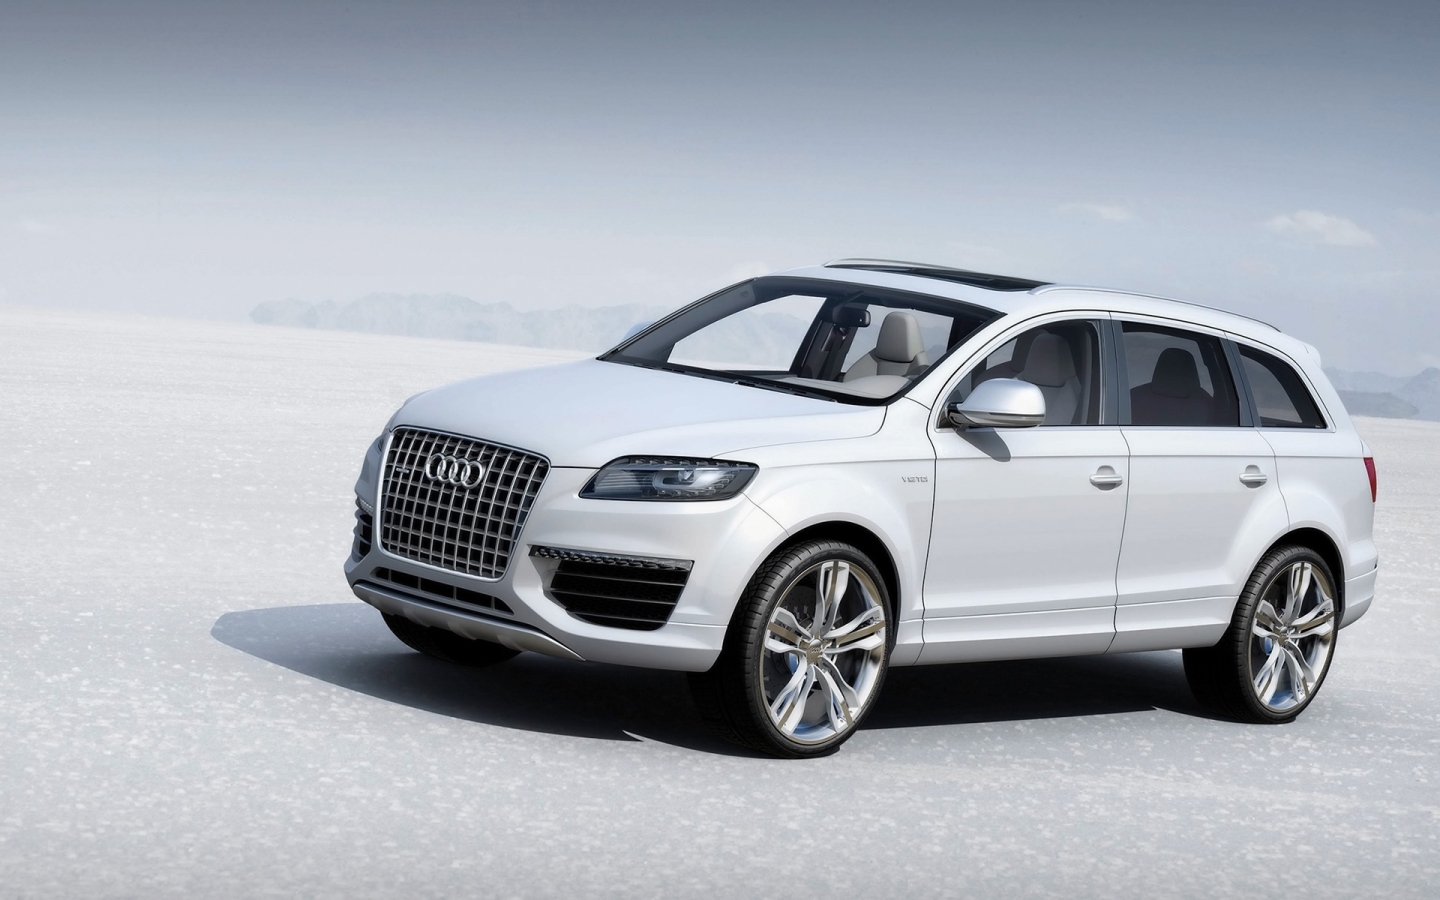 2007 Audi Q7 V12 TDI Revised Side Angle for 1440 x 900 widescreen resolution